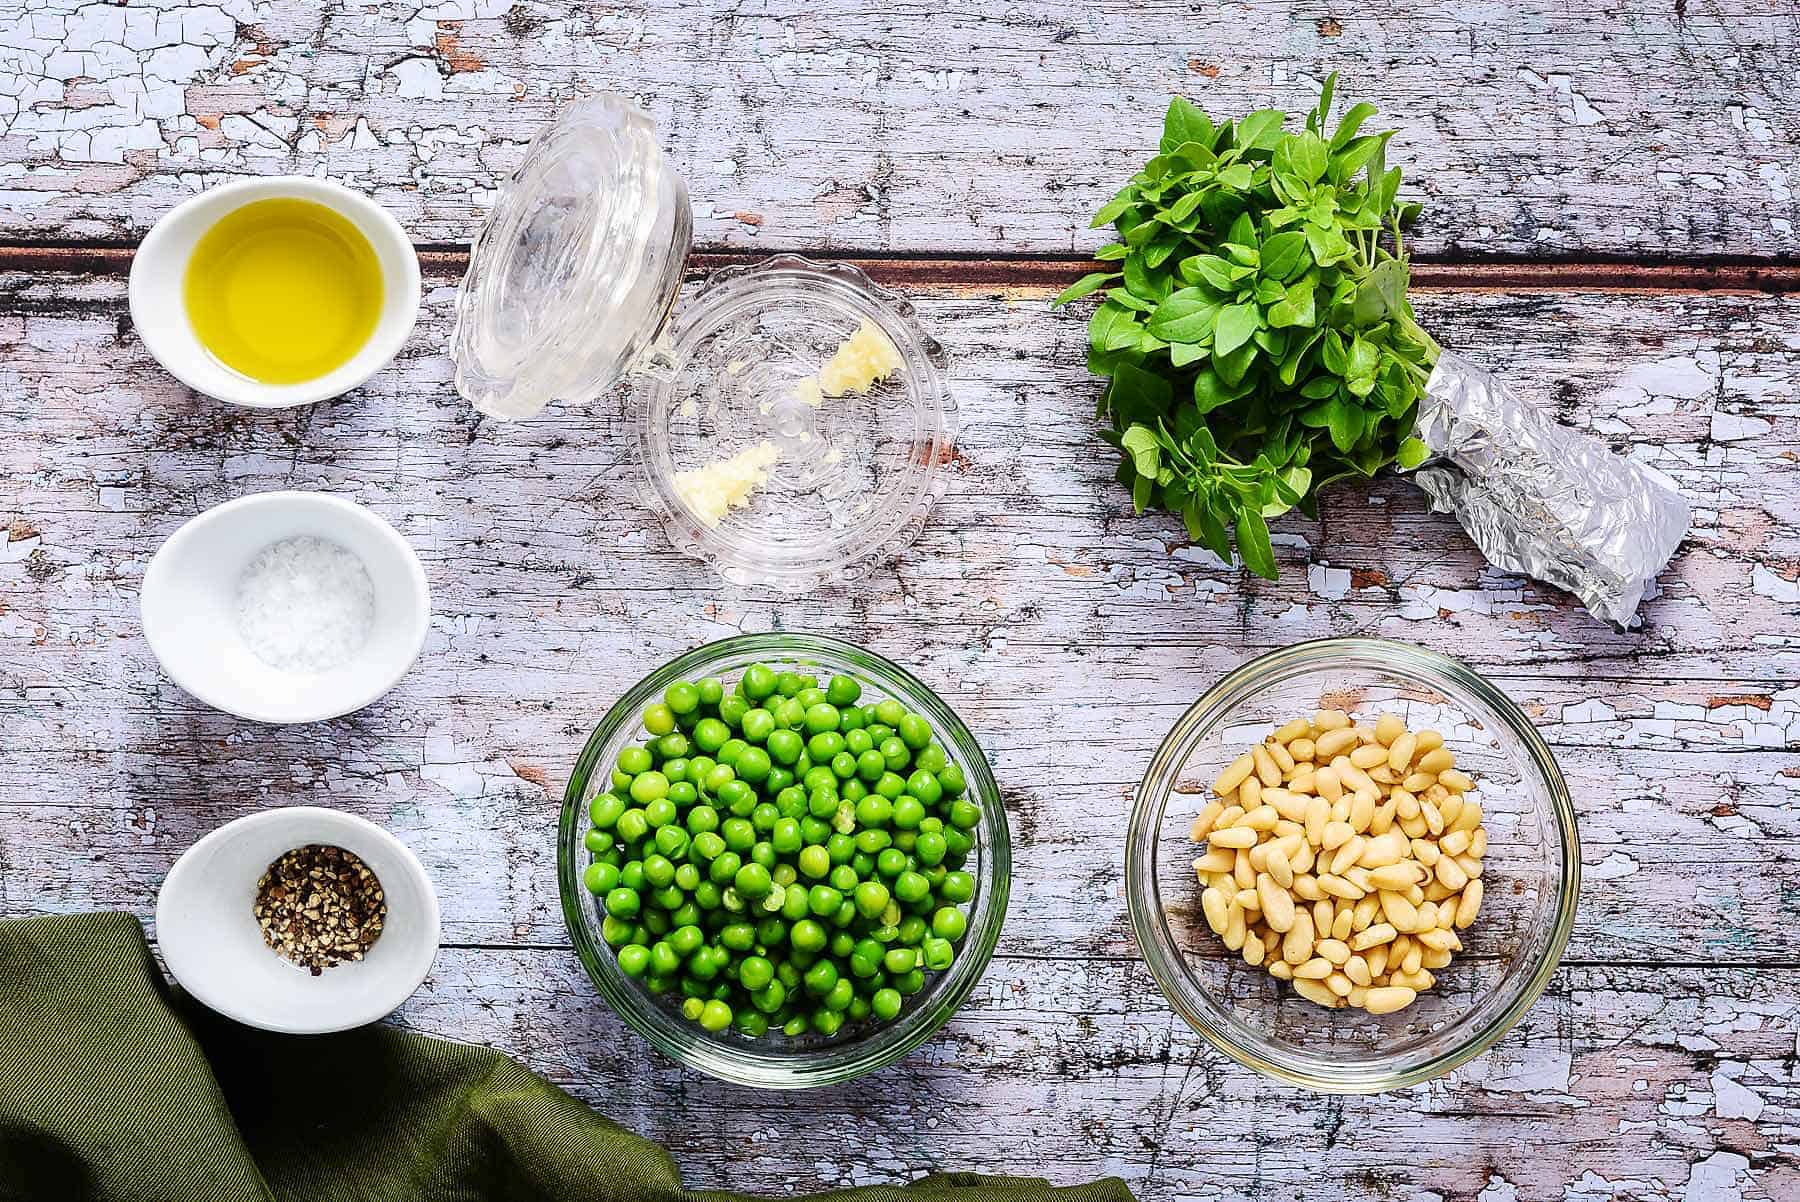 Ingredients for pea and basil pesto